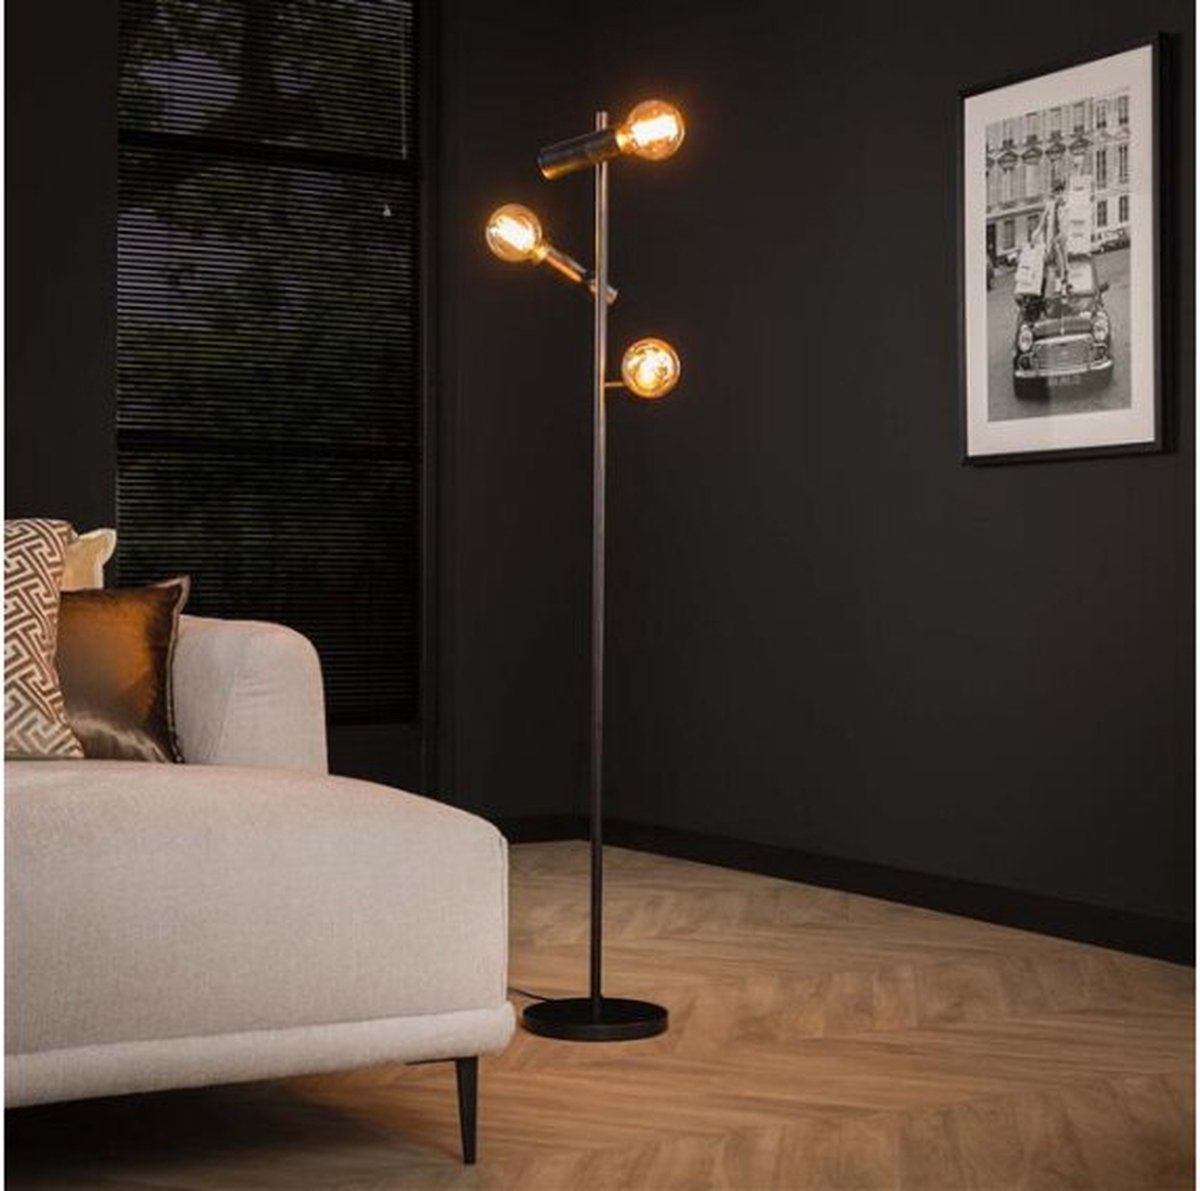 Vloerlamp Point 3 lampen - Charcoal